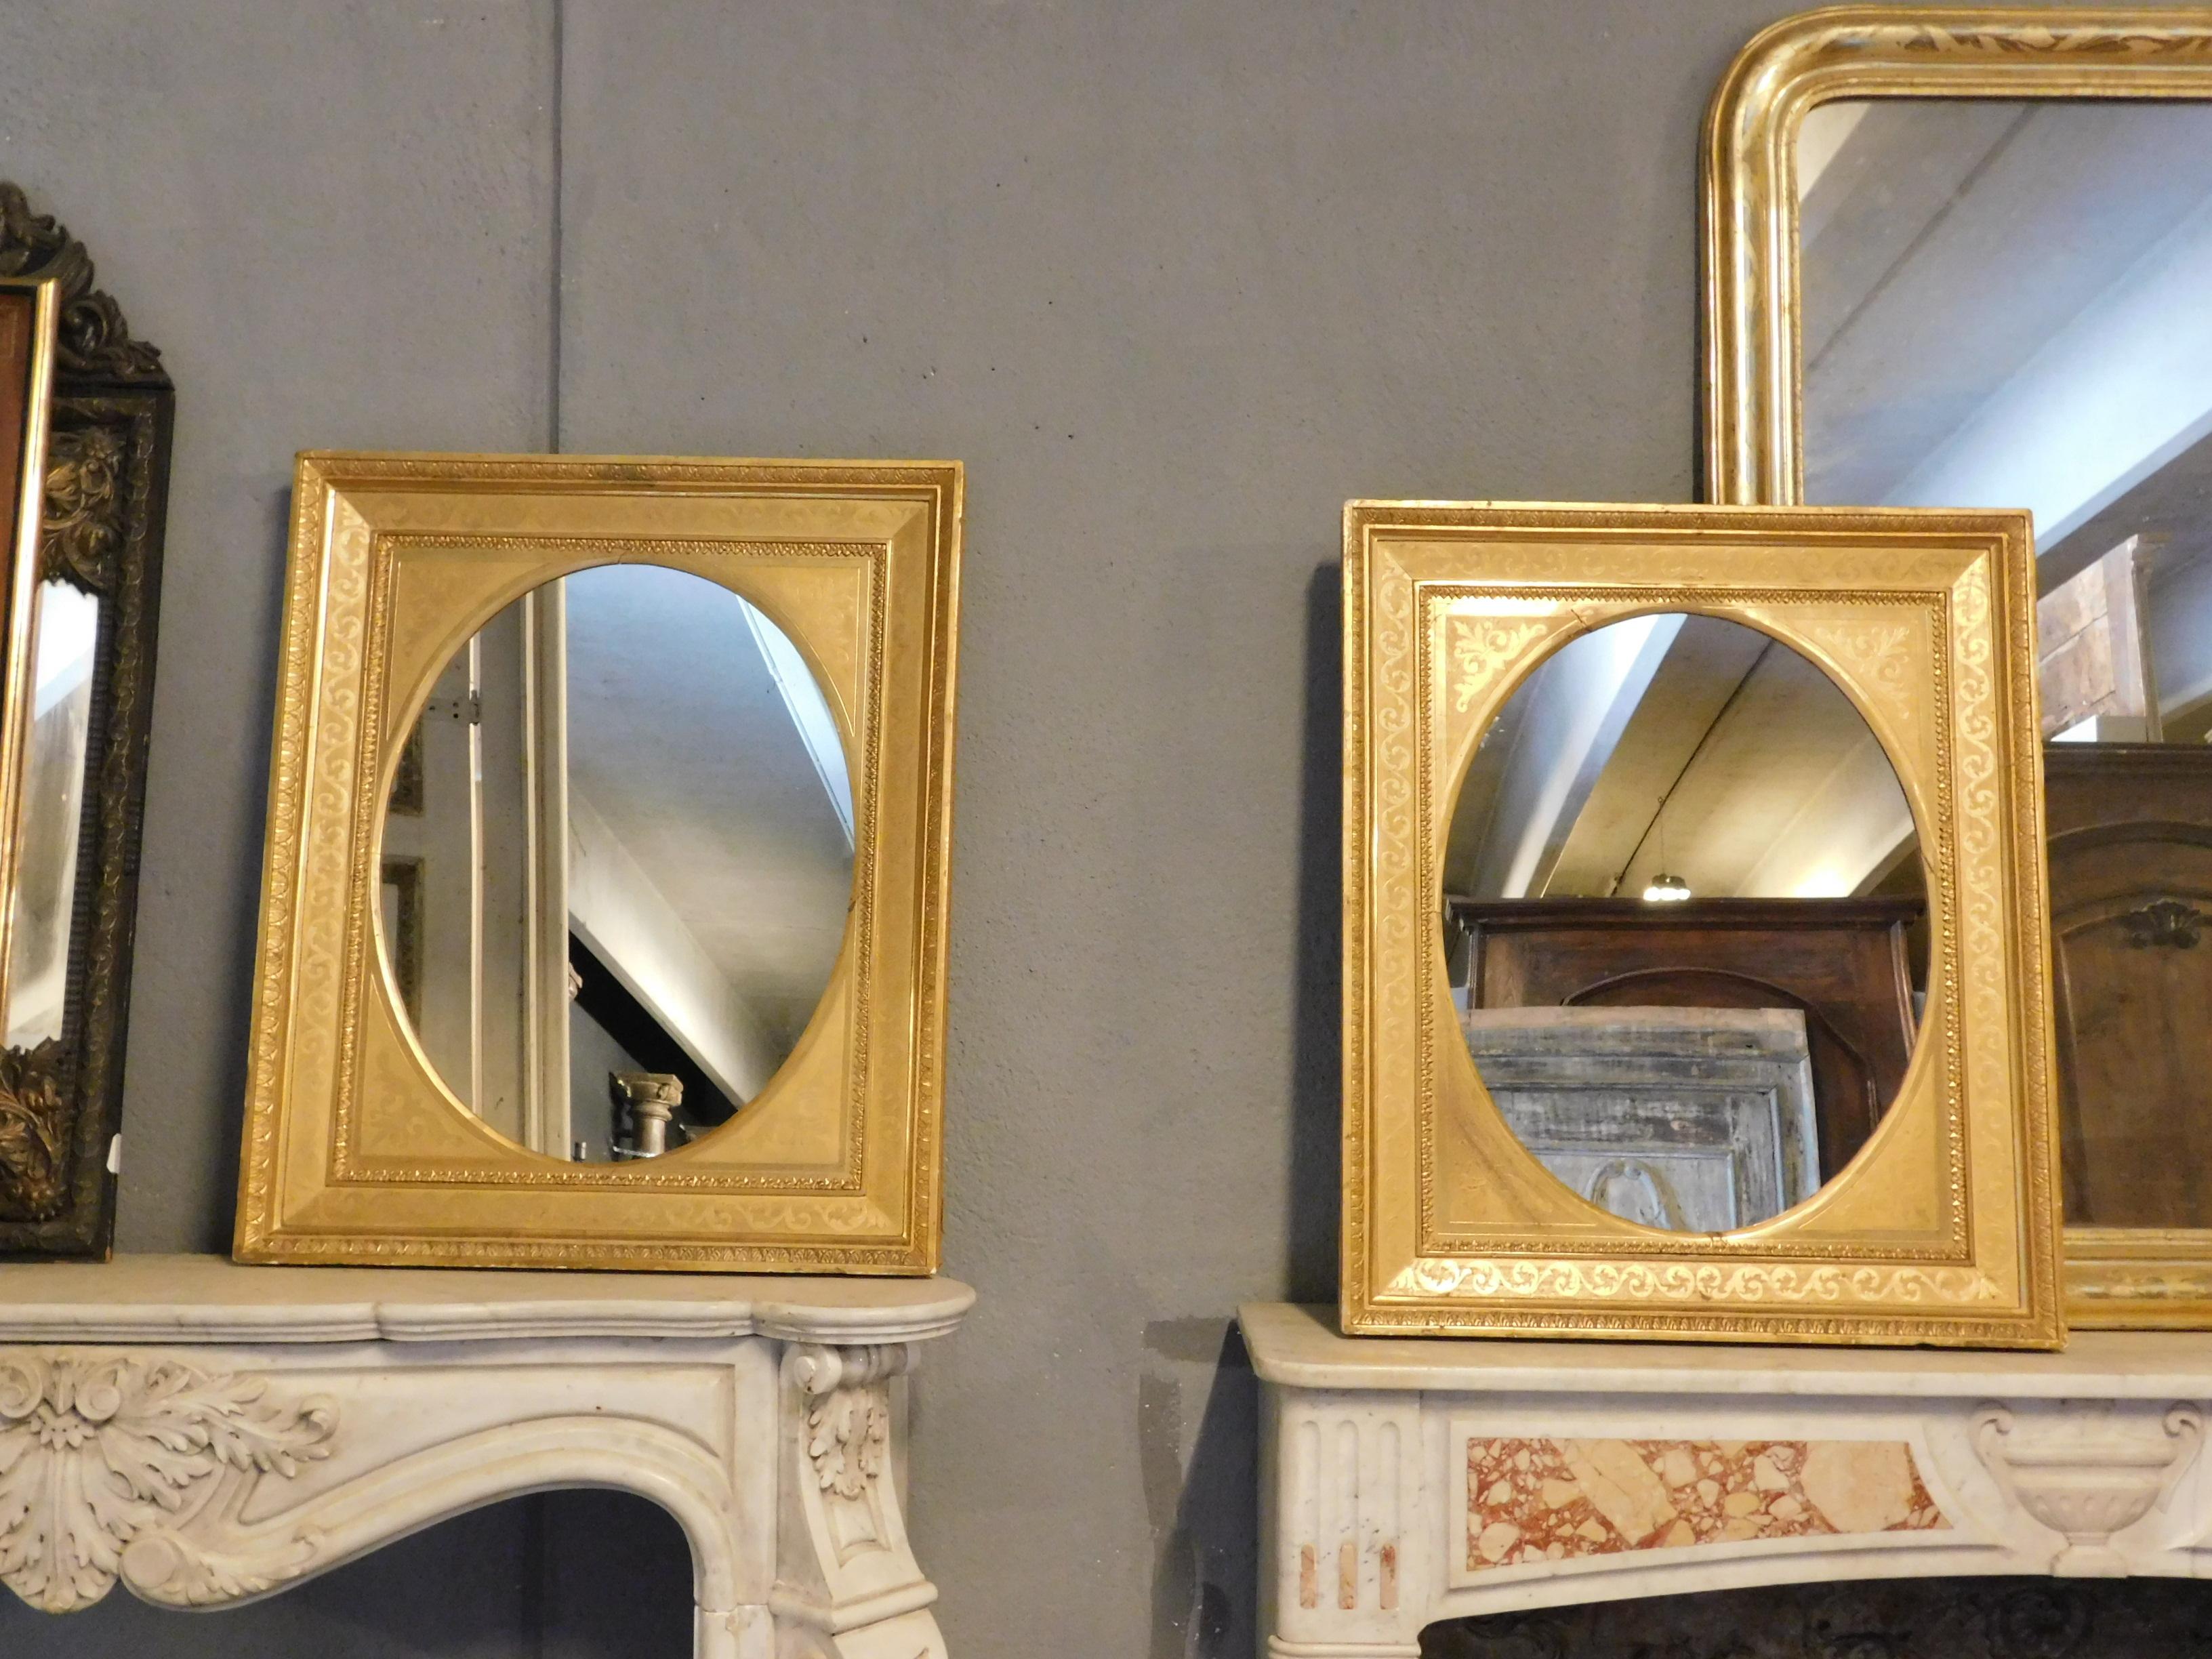 Antique pair of golden rectangular mirrors with oval internal mirror, decorations and engravings on the gilded wooden frame, built in the second half of the 19th century in Italy, beautiful in pairs, suitable for any environment given the size,